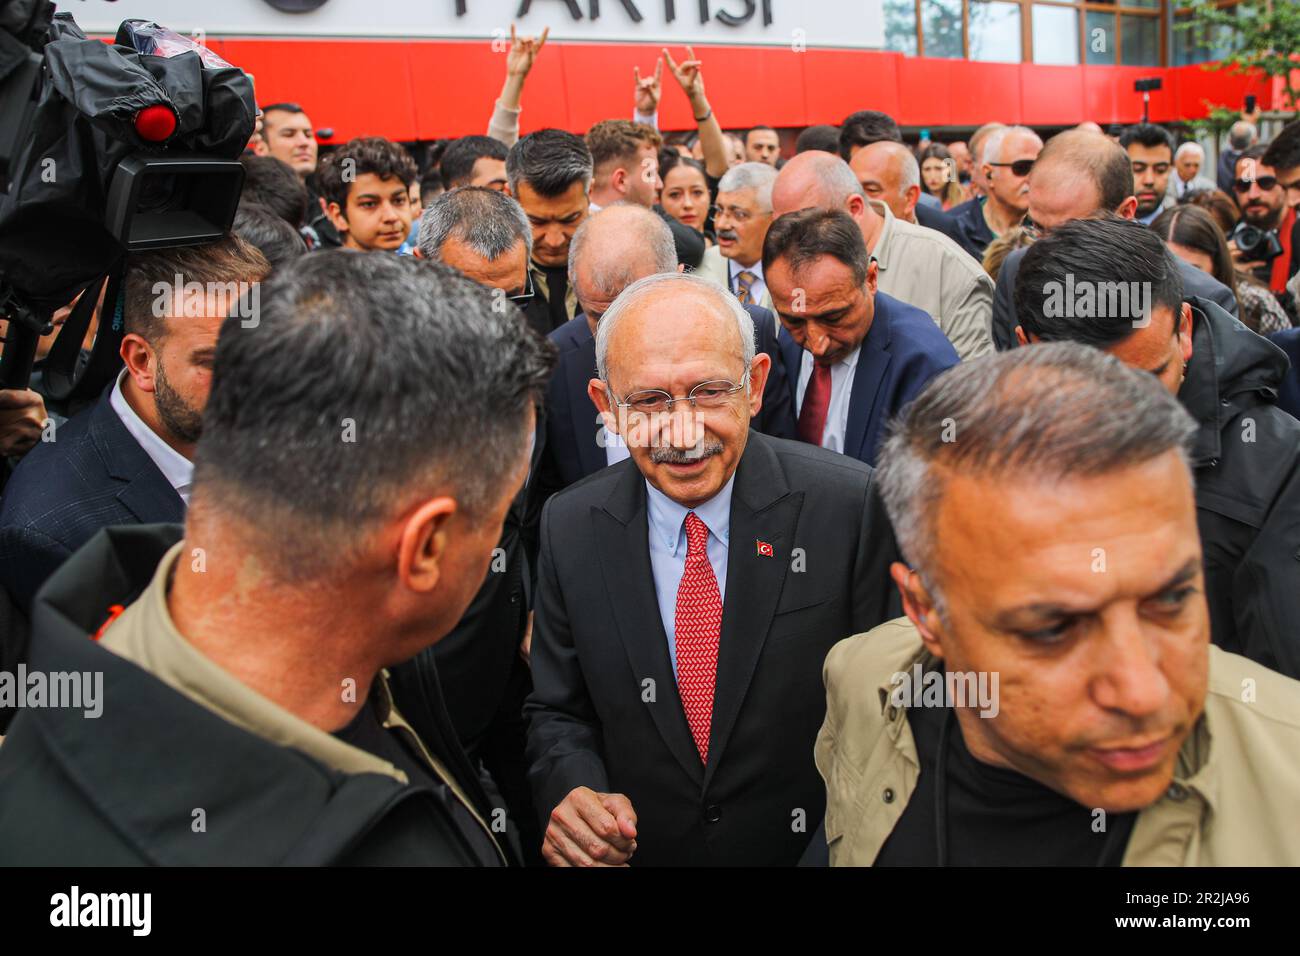 Kemal K?l?çdaro?lu, Chairman of the Republican People's Party and candidate for the 13th President of the Republic, arrives for the joint press conference. President of the Republican People's Party, who wanted to get the support of Sinan O?an, the Presidential candidate of the ATA Alliance, and Ümit Özda?, the President of the ATA Alliance, and Ümit Özda?, who received 5.17 percent of the votes in the 14 May elections, with approximately 3 million votes, in the 2nd Round Presidential elections to be held on 28 May. Kemal K?l?çdaro?lu, the 13th Presidential candidate, met with Ümit Özda? at th Stock Photo